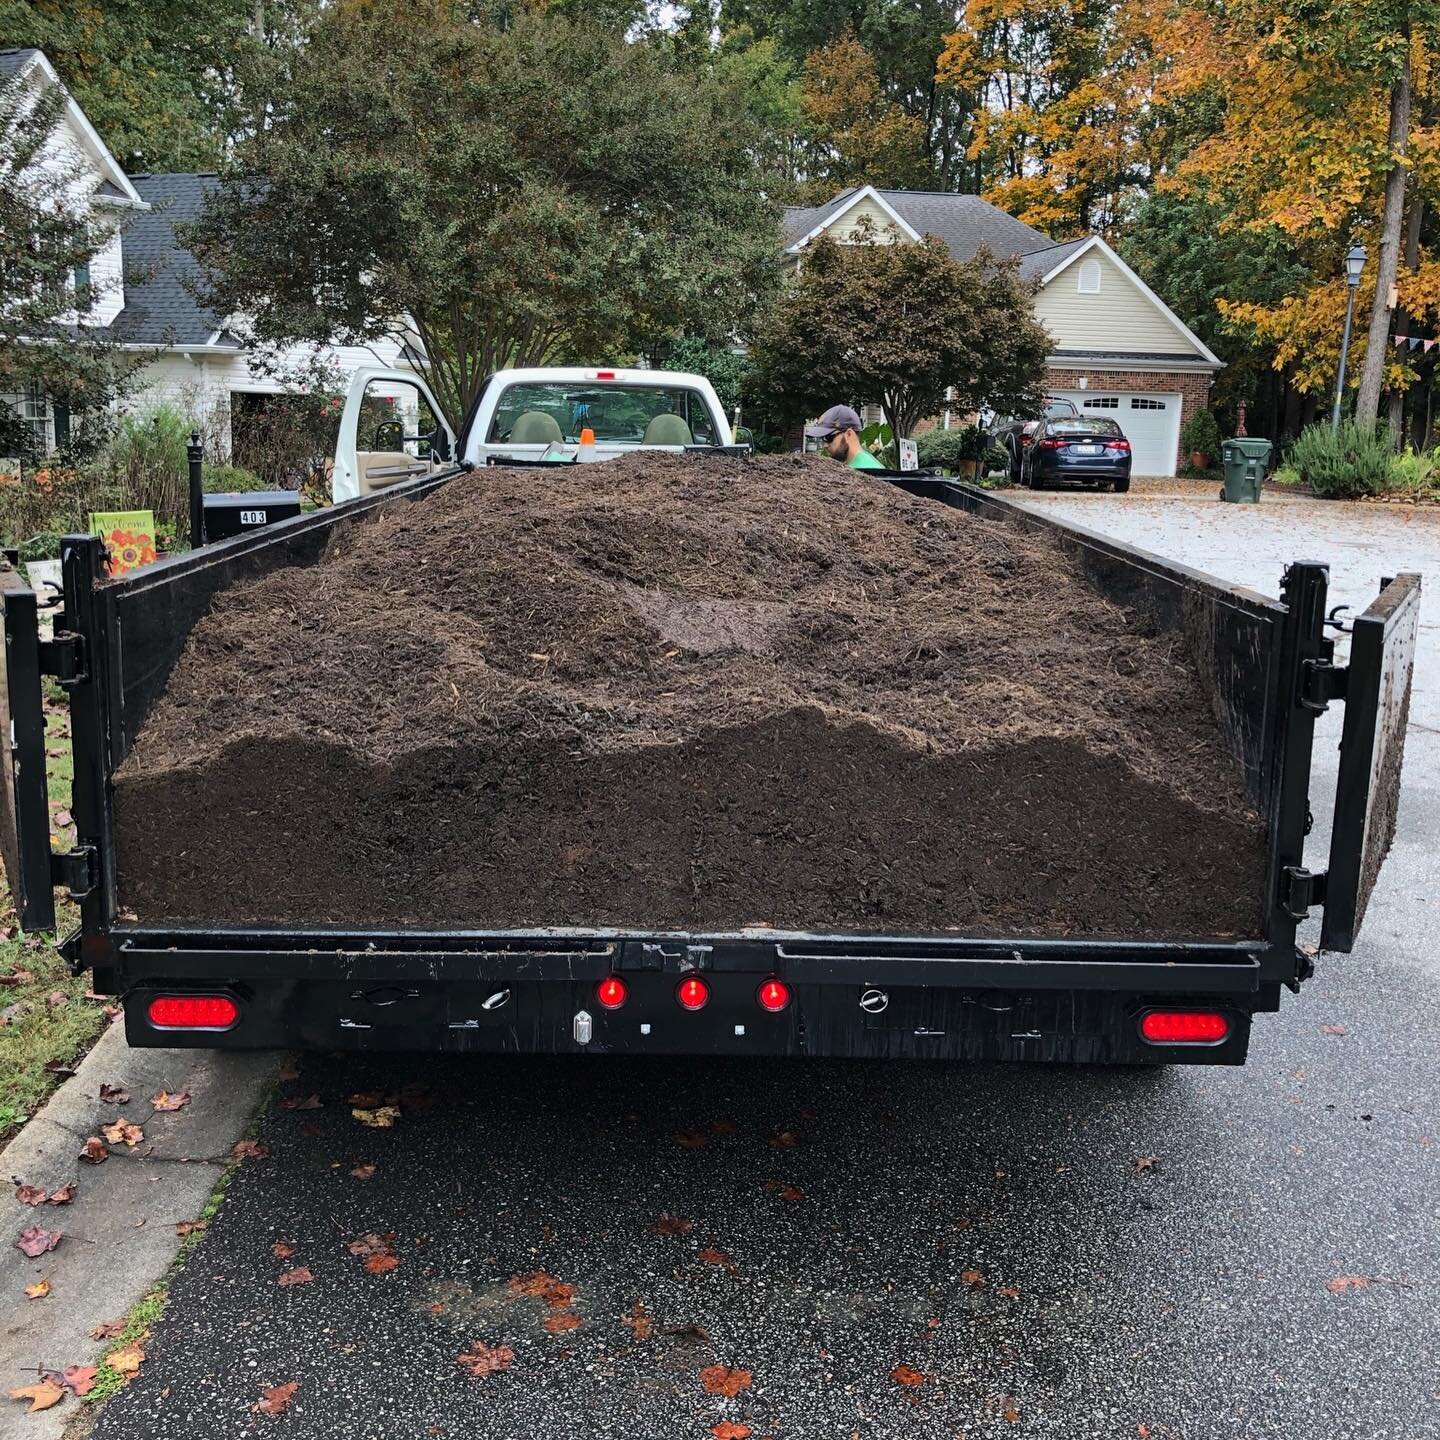 MULCH INSTAL:

It sure has been rainy recently but that hasn&rsquo;t stopped us!  Recently put out 15 yards of mulch for a fresh start this spring